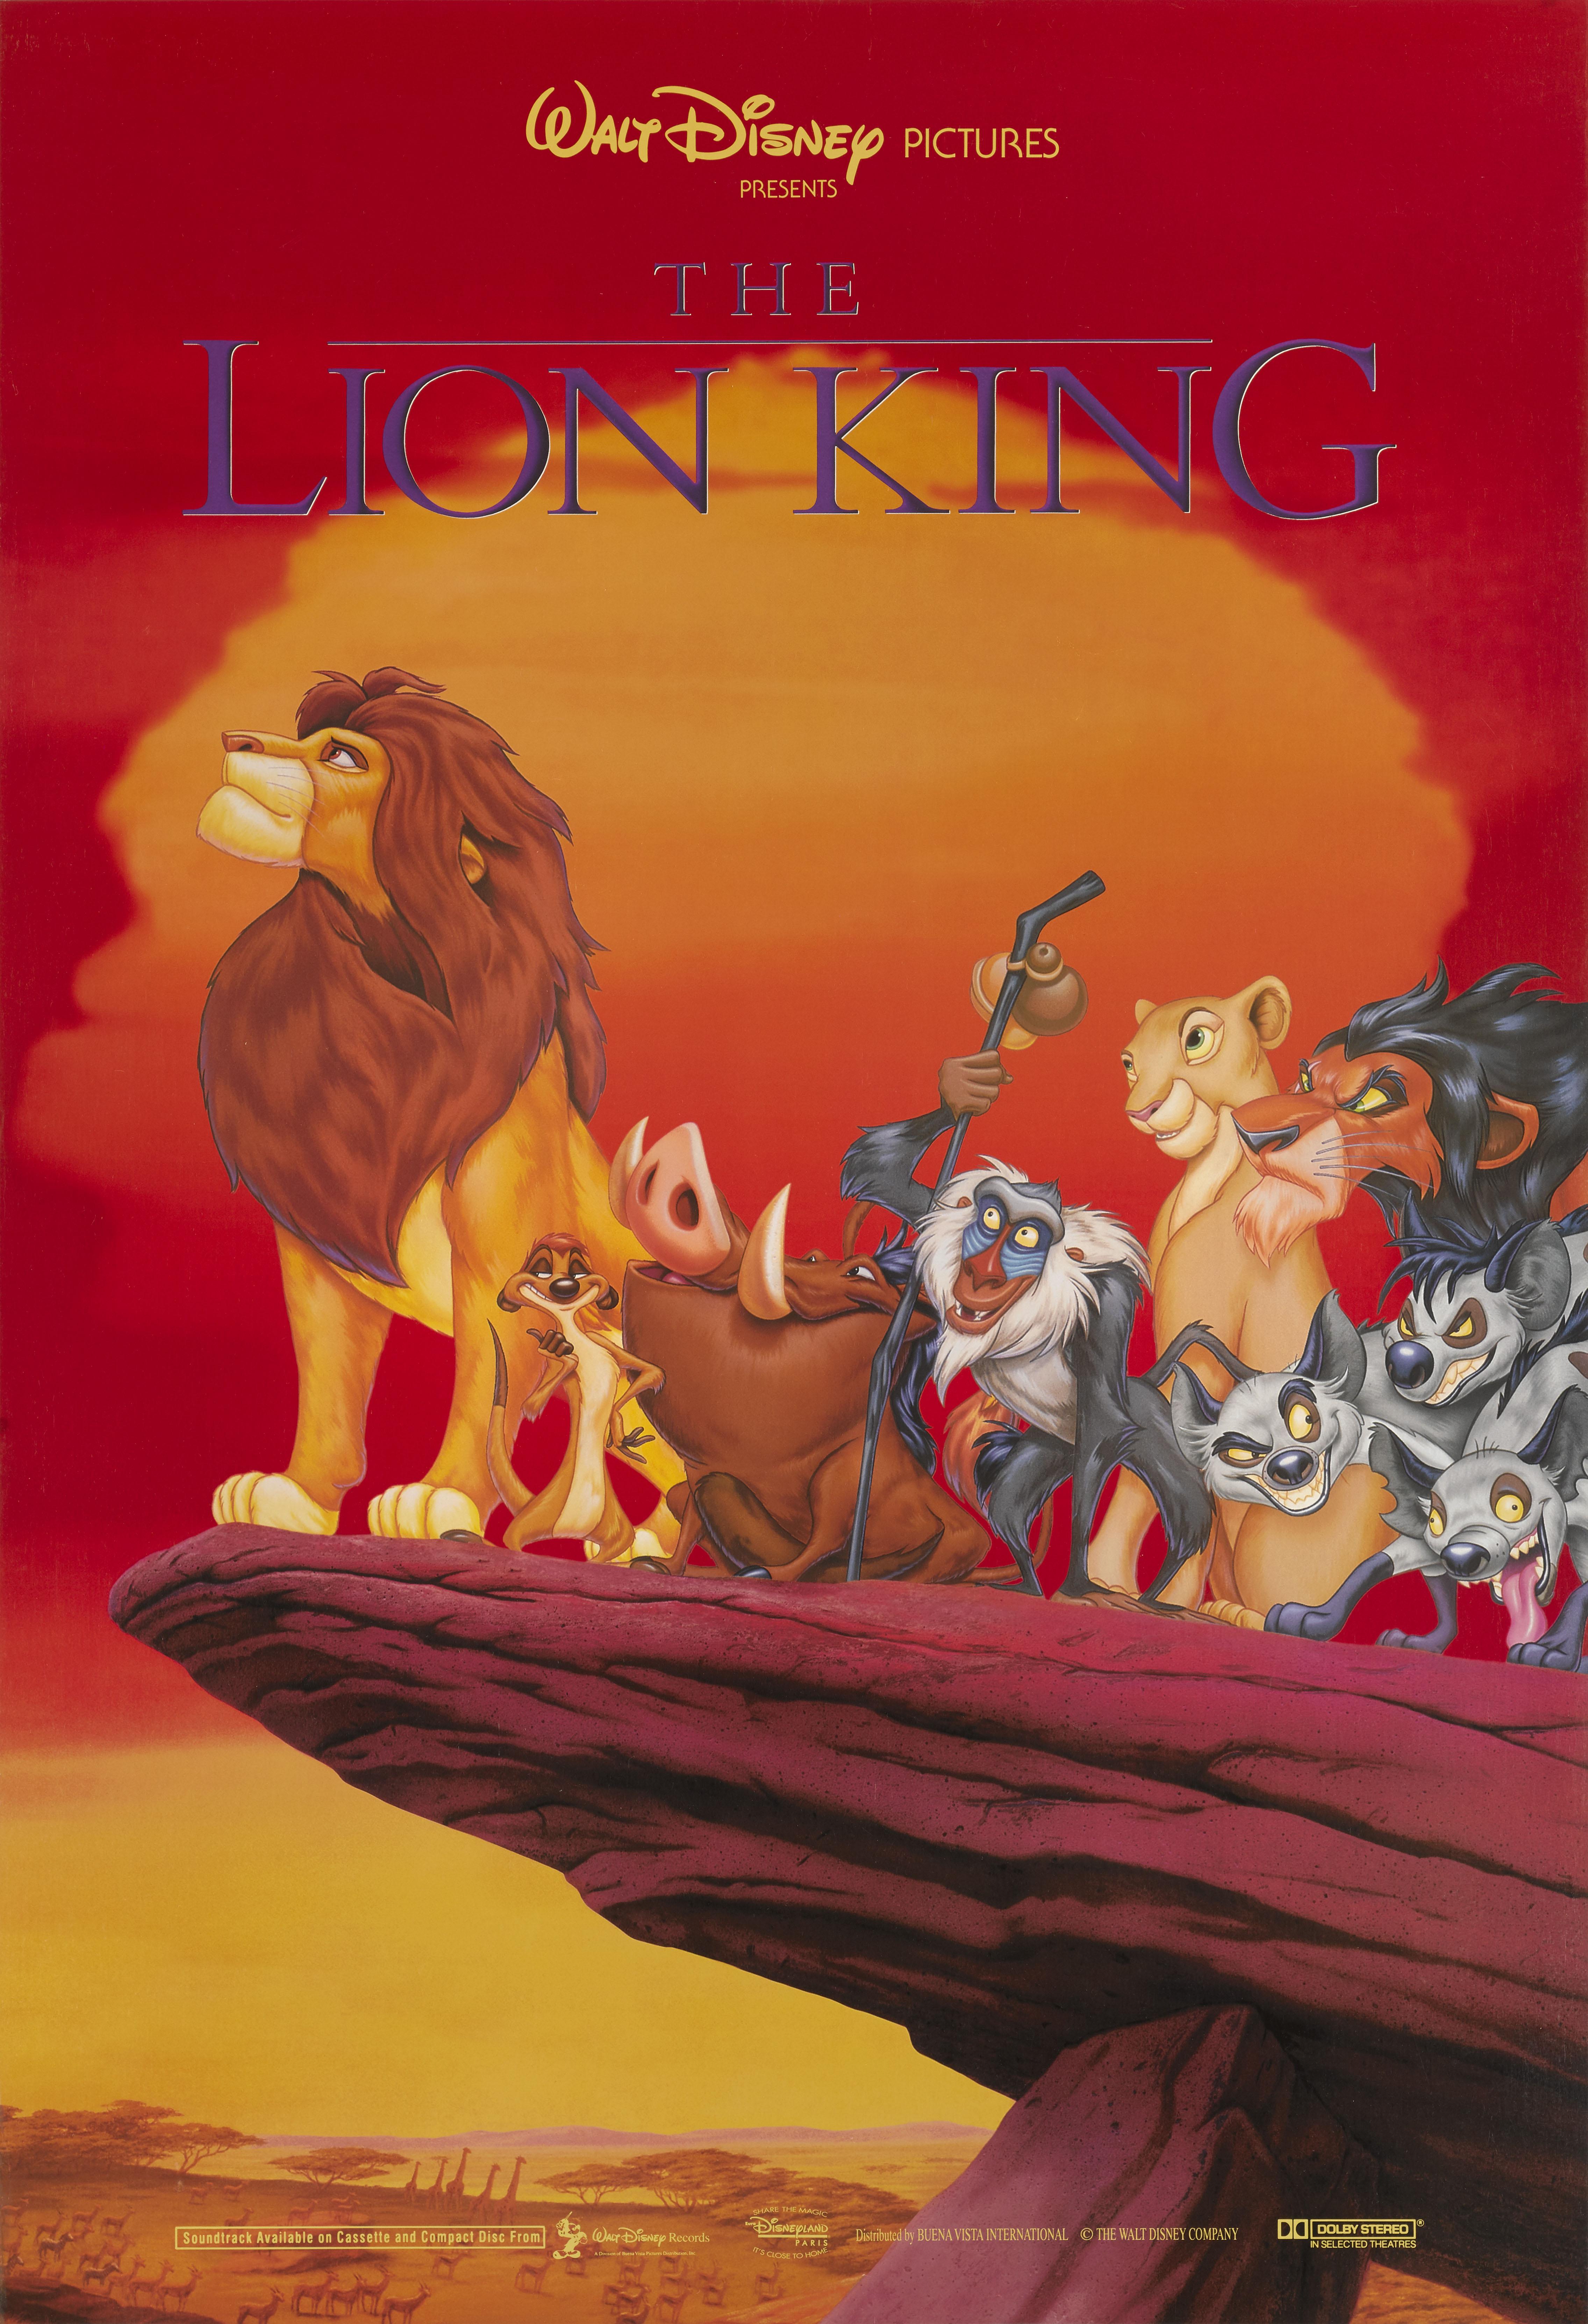 Original US International style film poster for the 1994 animation The Lion King. This animated musical was directed by Roger Allers and Rob Minkoff. The songs were composed by Elton John and lyrics written by Tim Rice, with a score by Hans Zimmer.